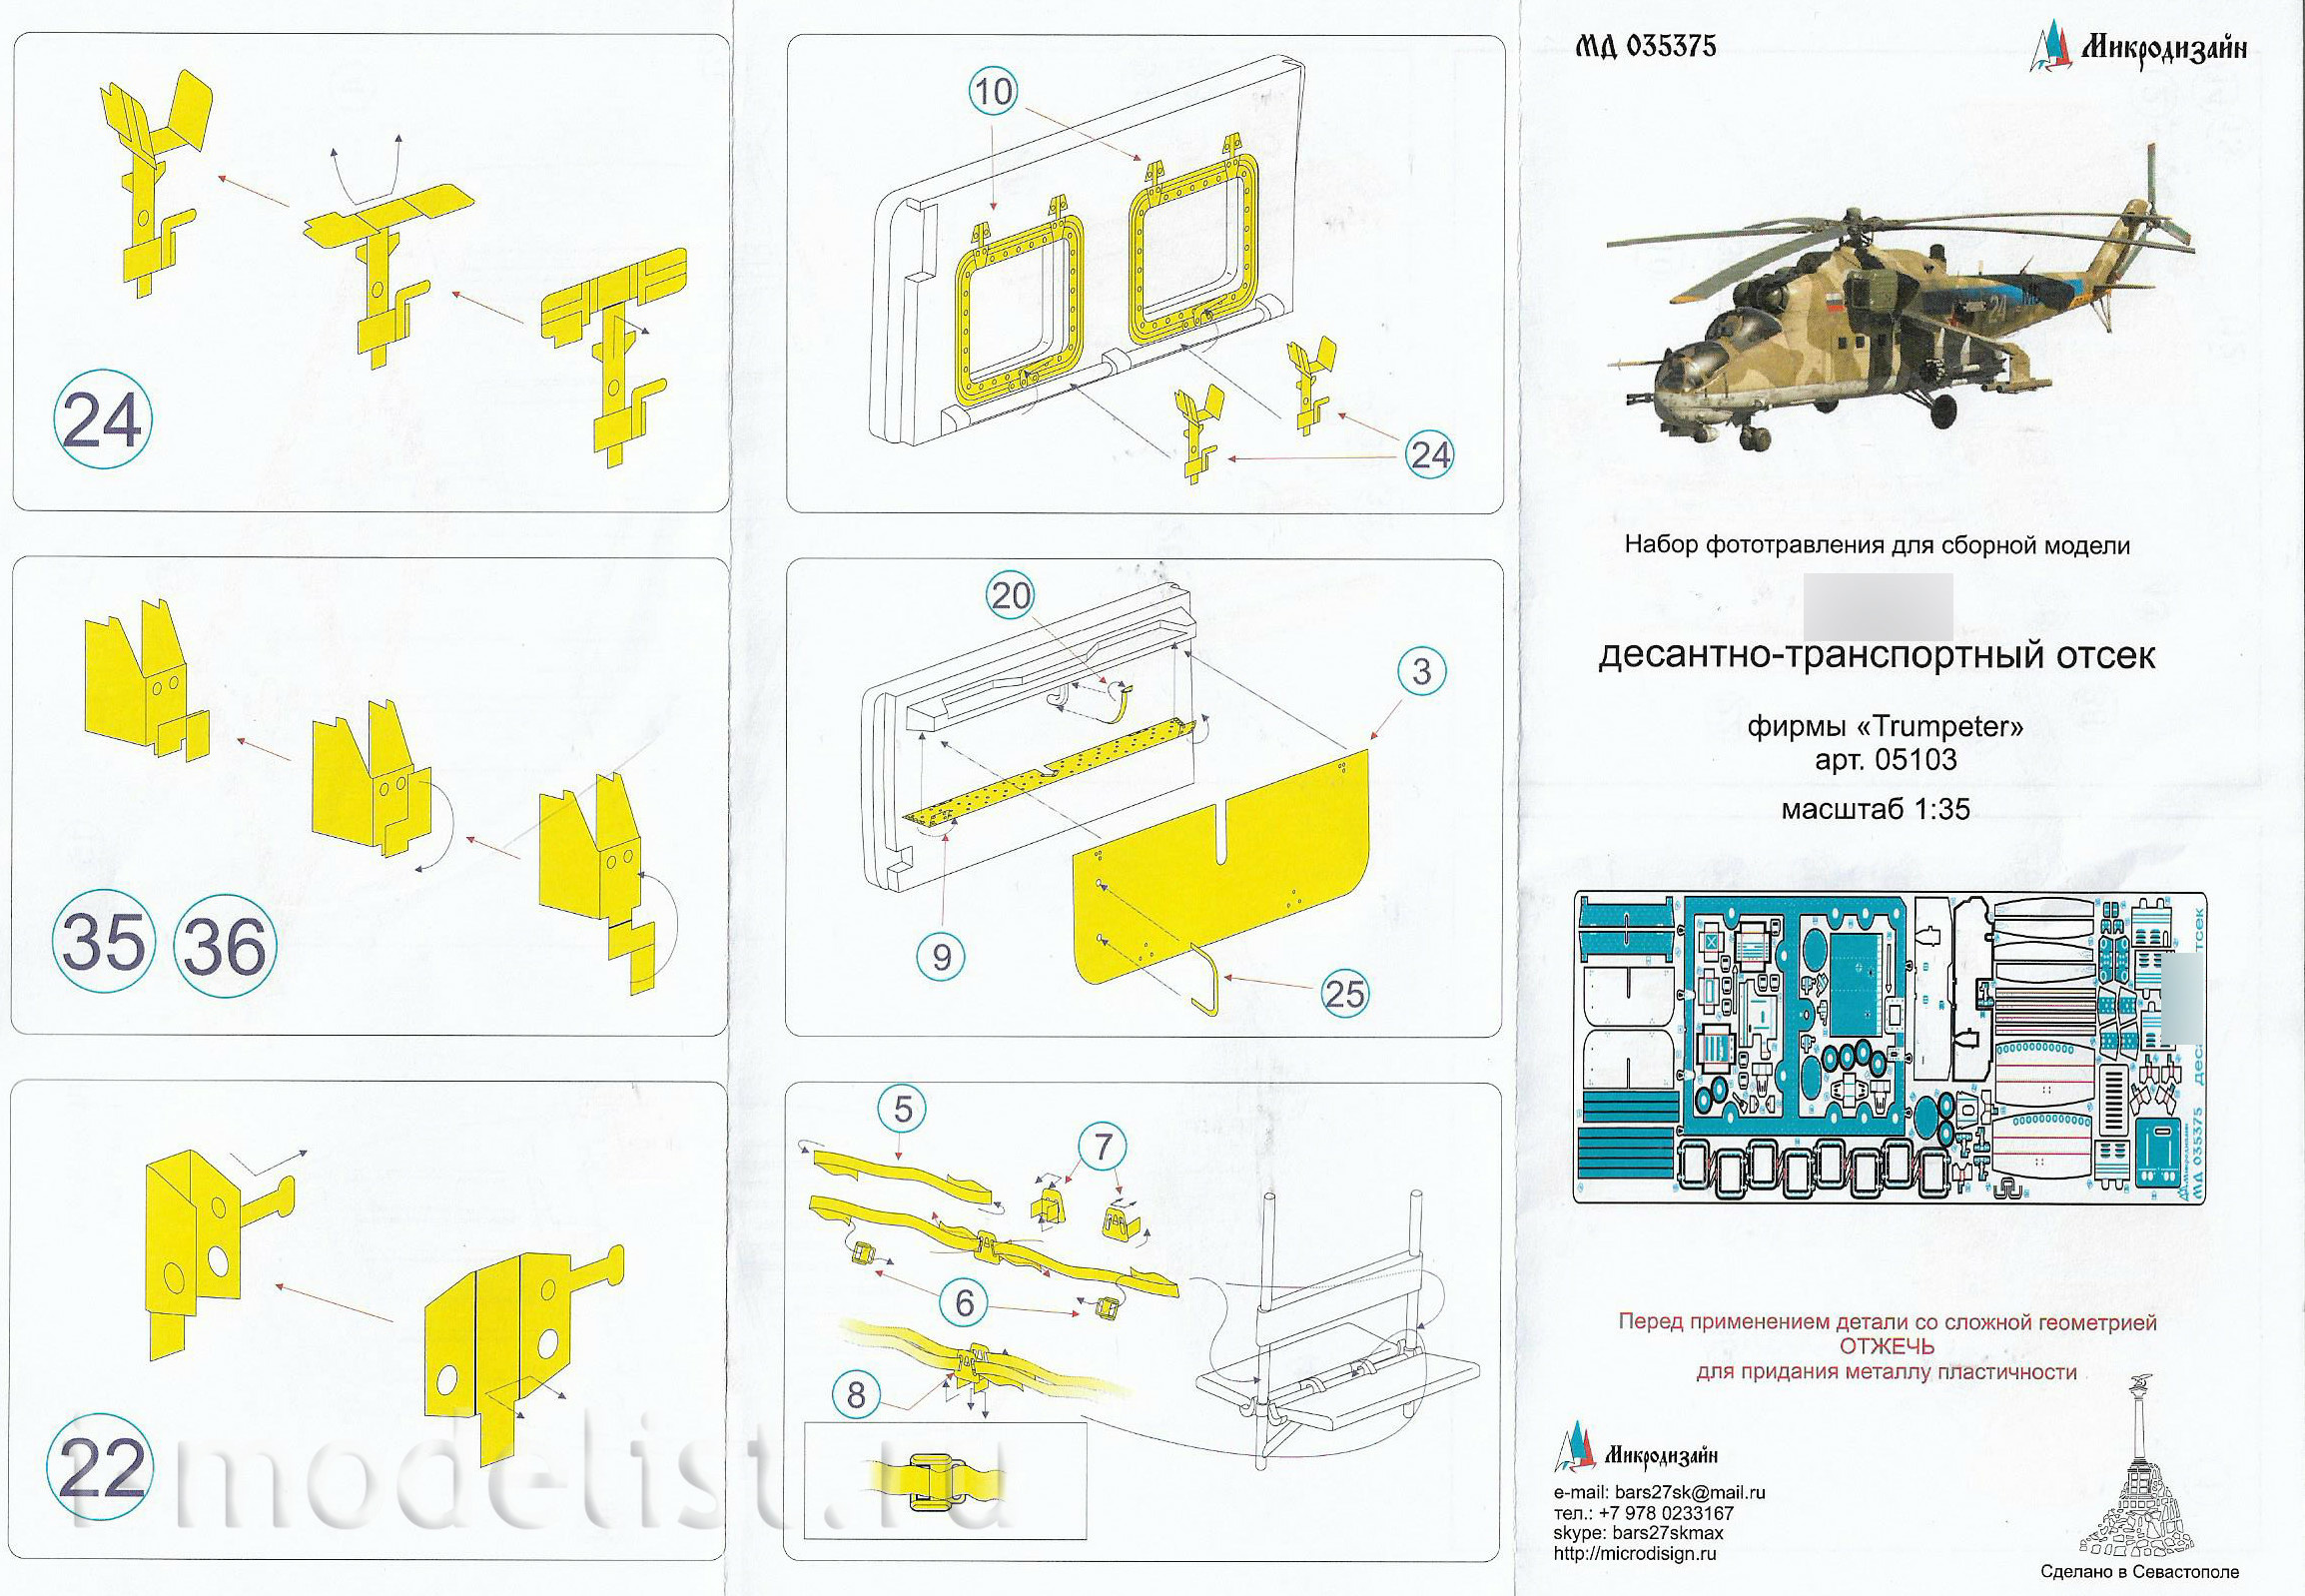 035375 Microdesign 1/35 Photo etching for the amphibious transport compartment of the Crocodile helicopter from Trumpeter